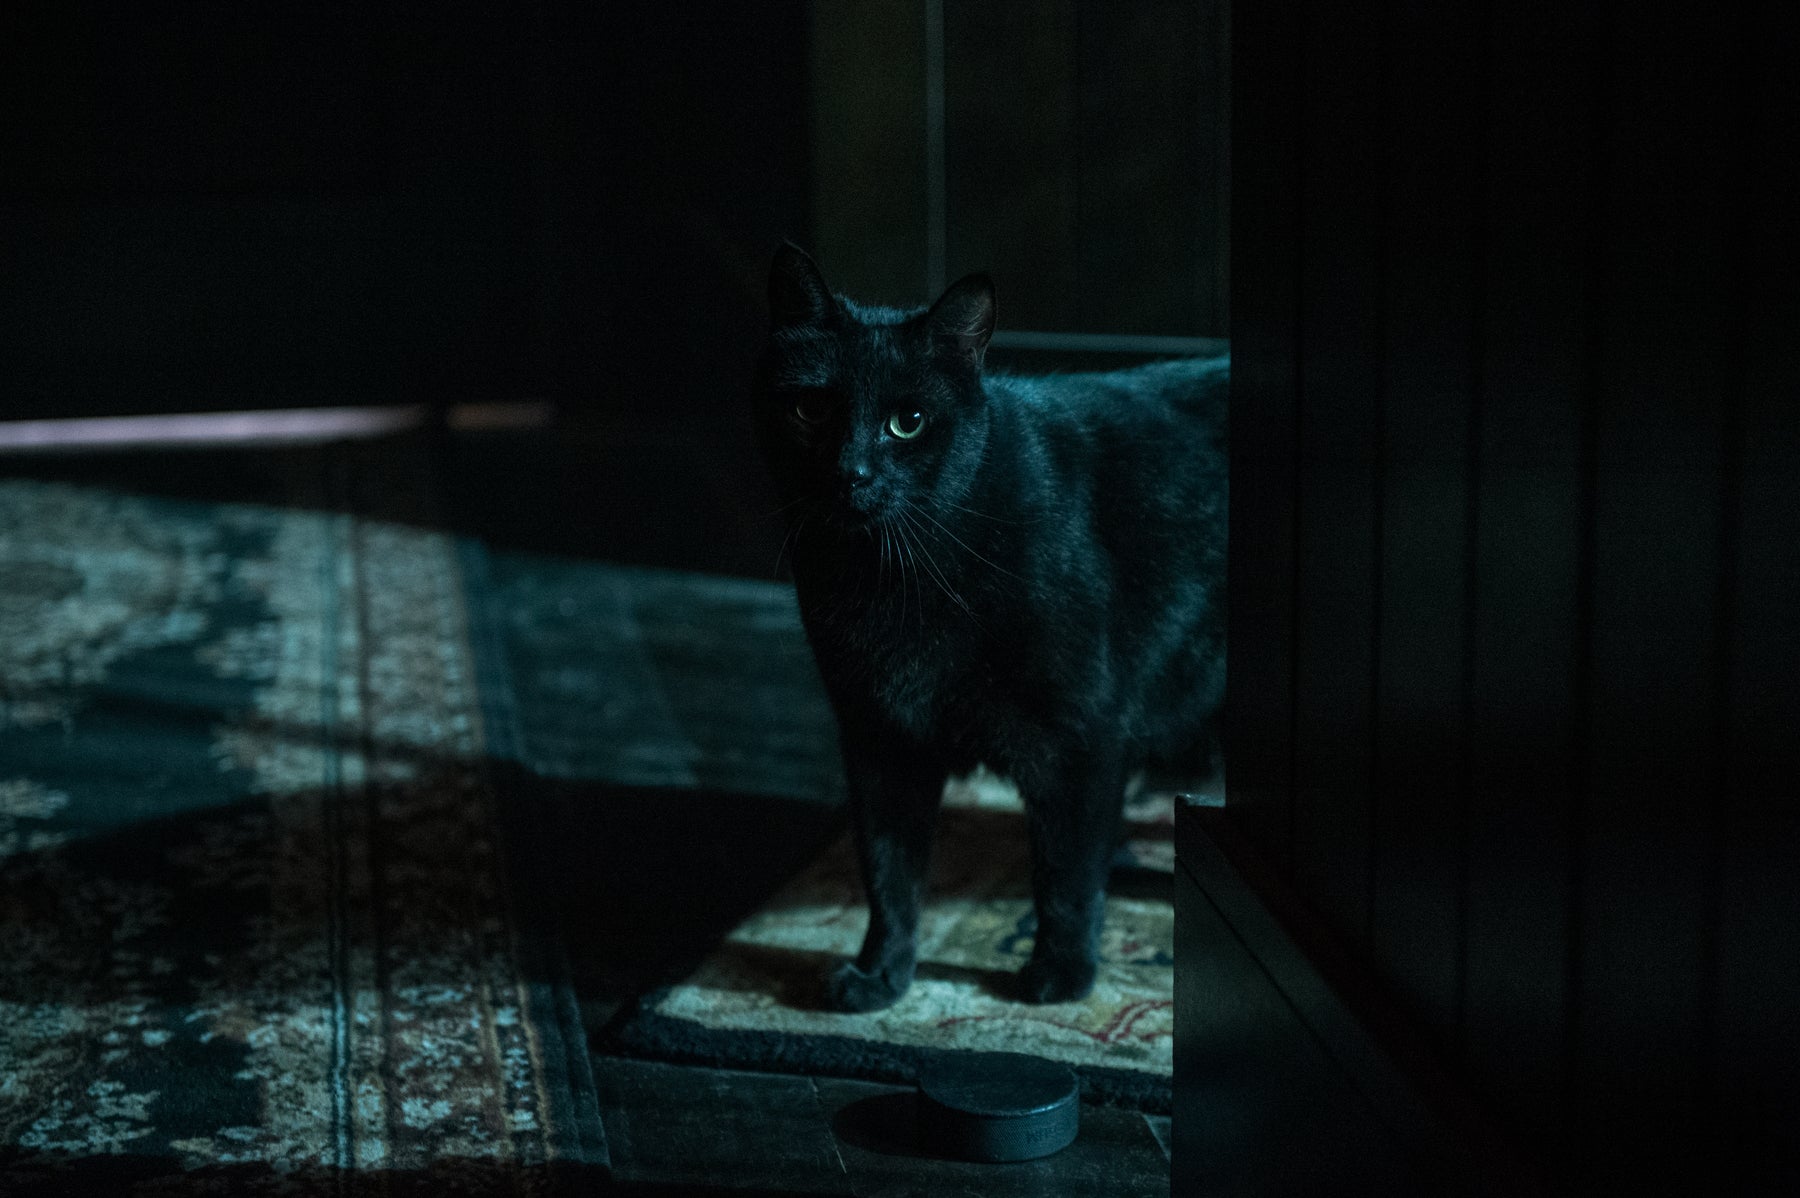 Salem the black cat and Sabrina Spellman’s familiar stands in a dark room in a scene from Chilling Adventures of Sabrina.